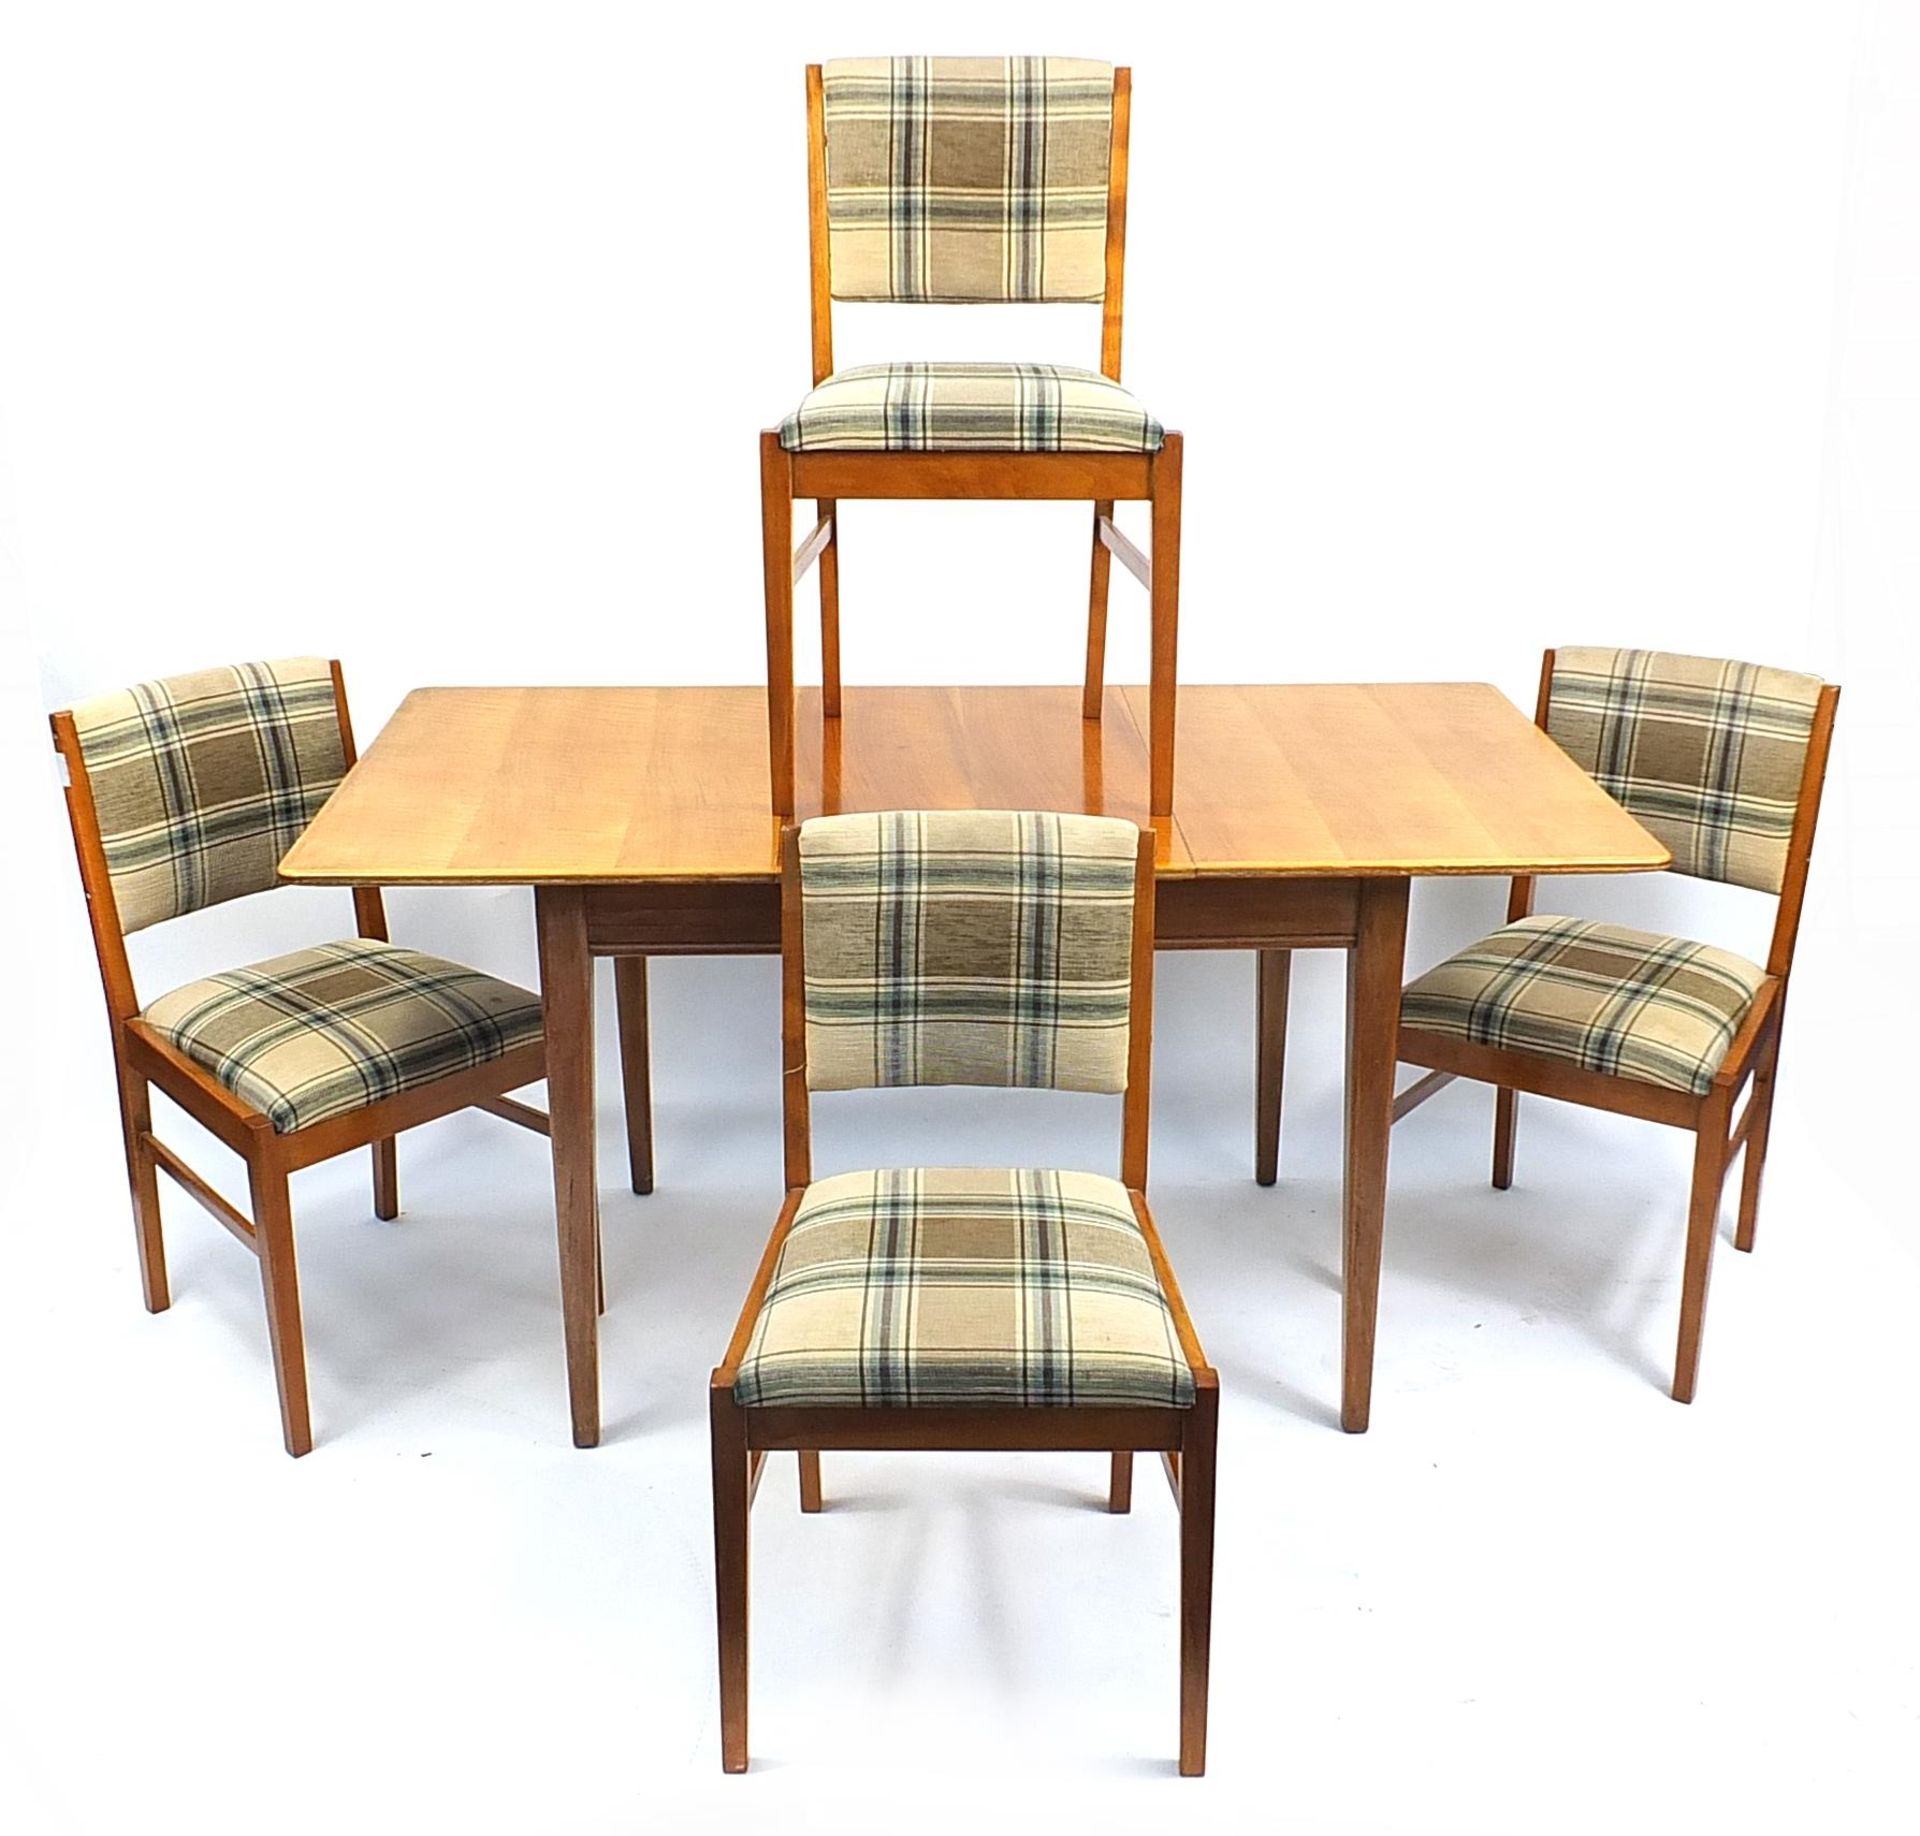 Gordon Russell extending dining table with four chairs, 77cm H x 107cm W x 78cm D